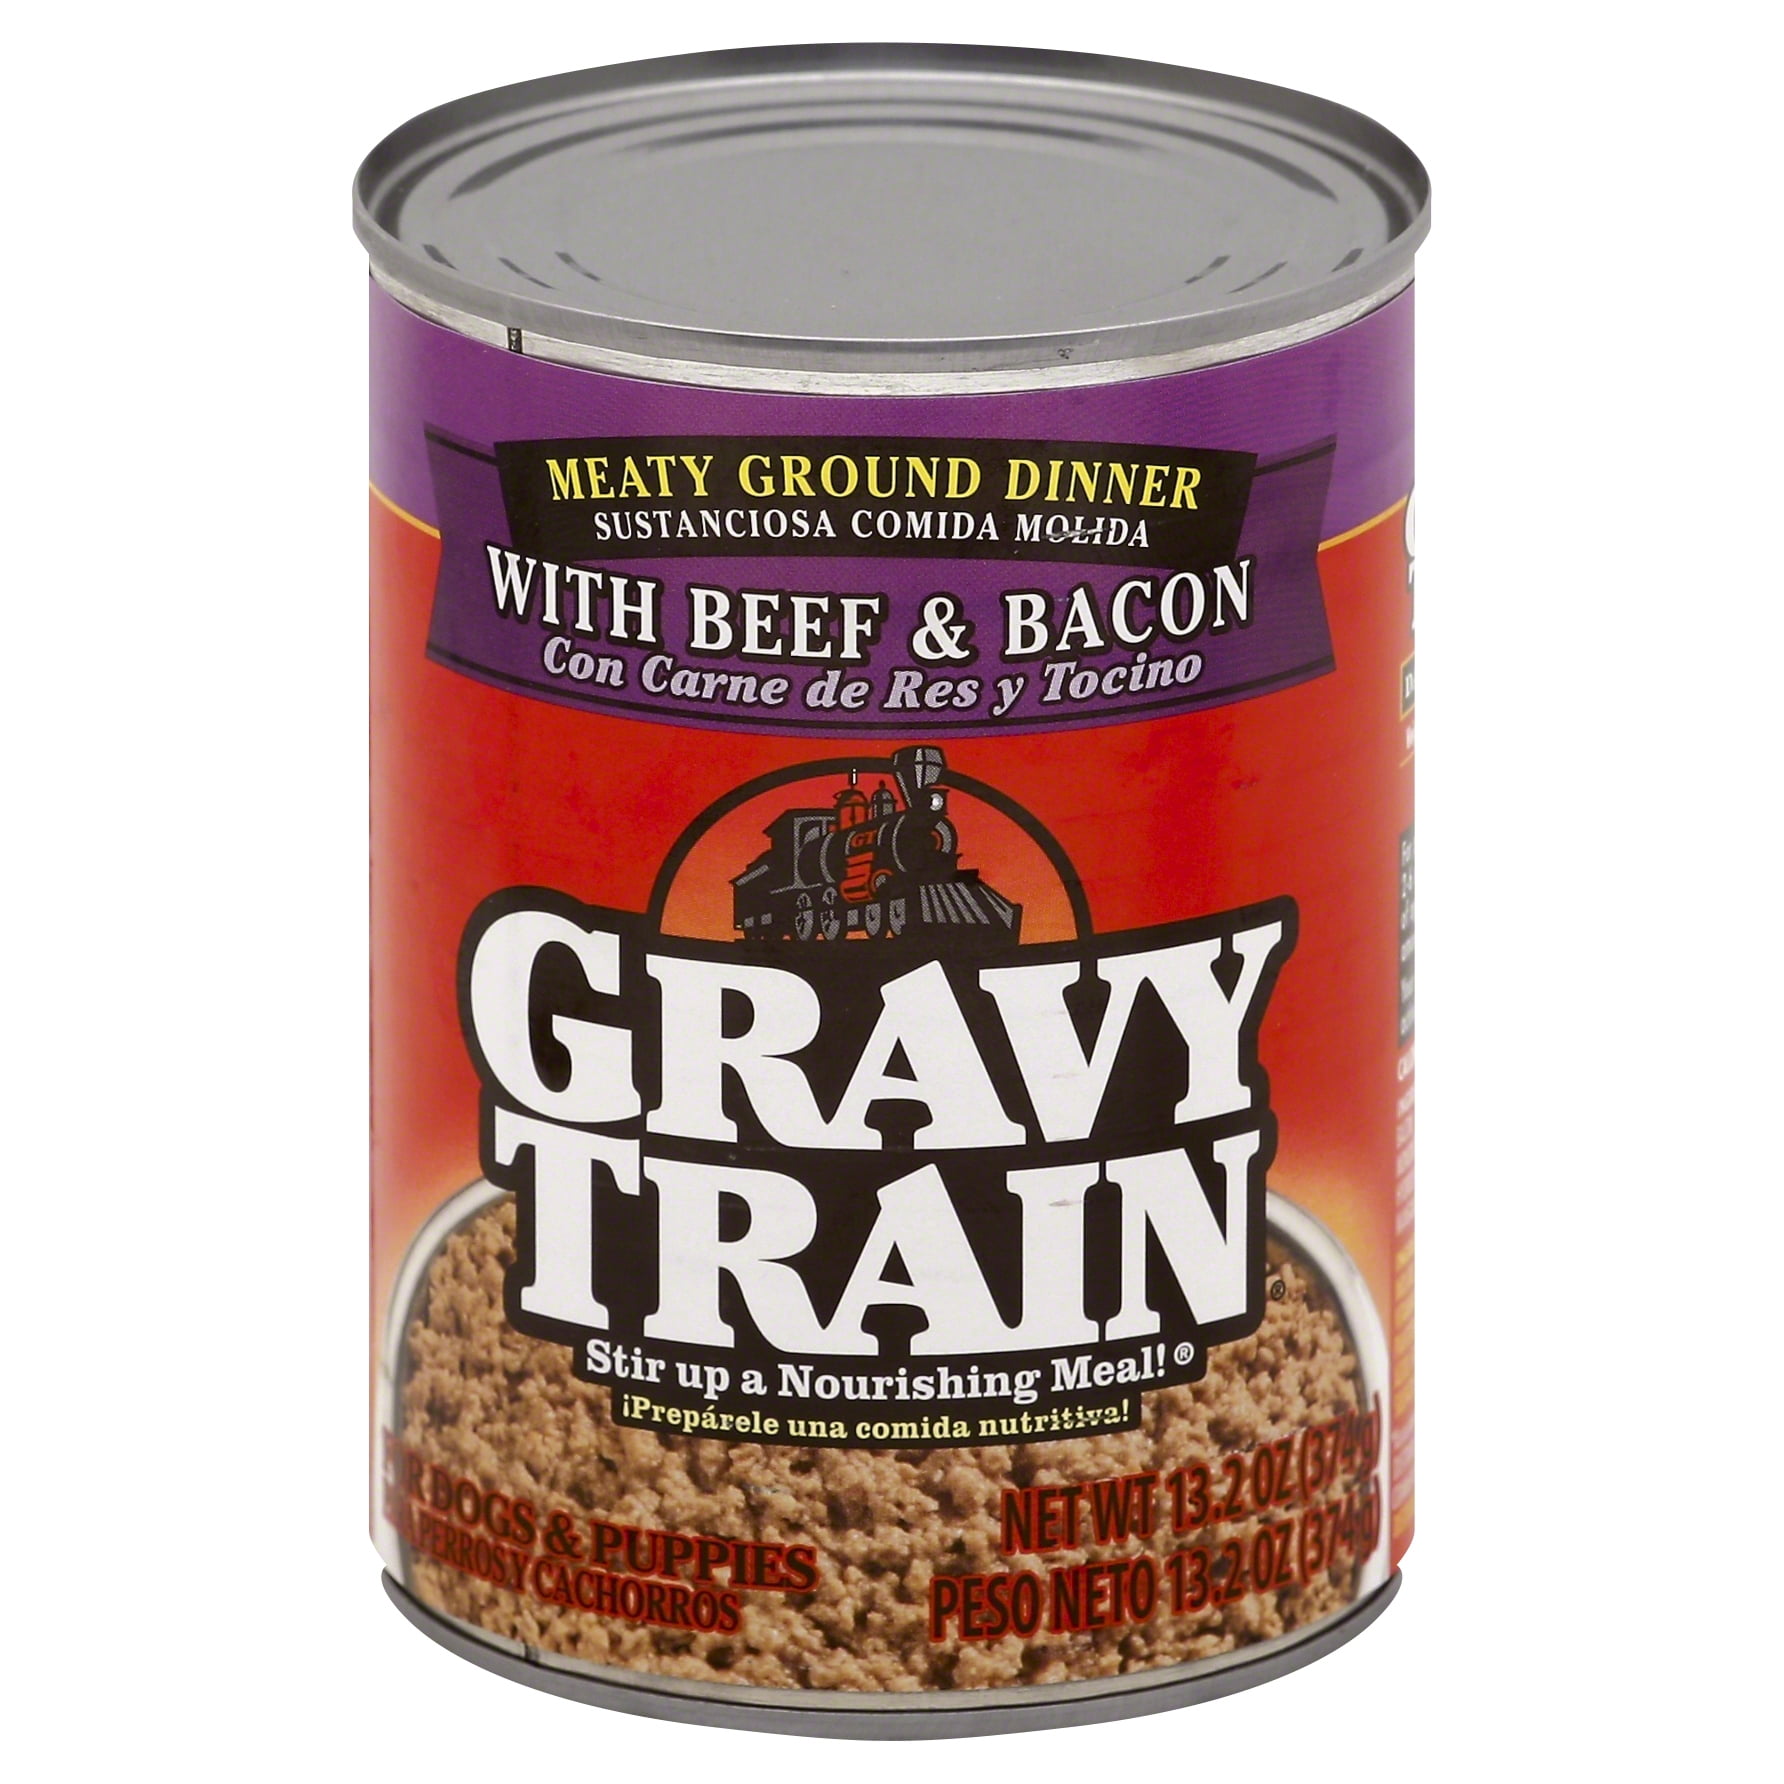 Gravy Train Meaty Ground Dinner with Beef and Bacon Wet Dog Food, 13.2